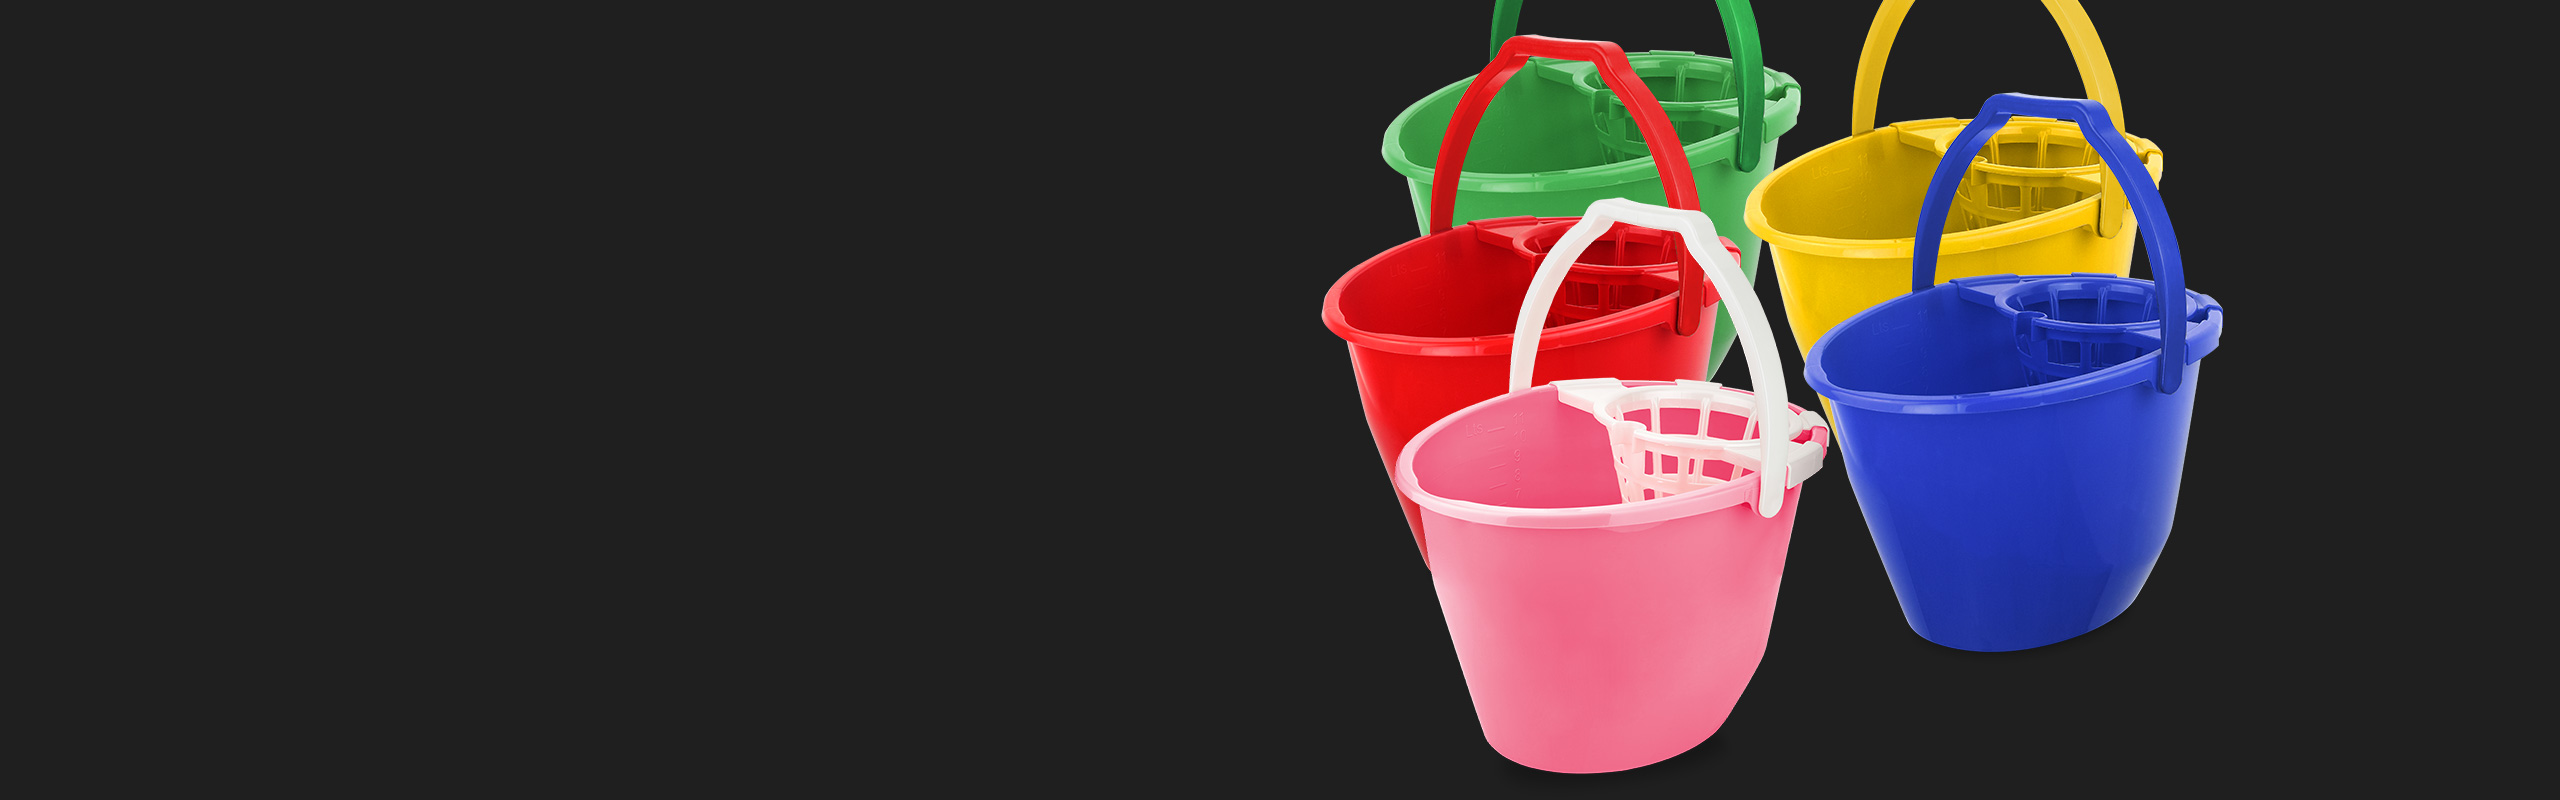 A bucket that is the master of mopping